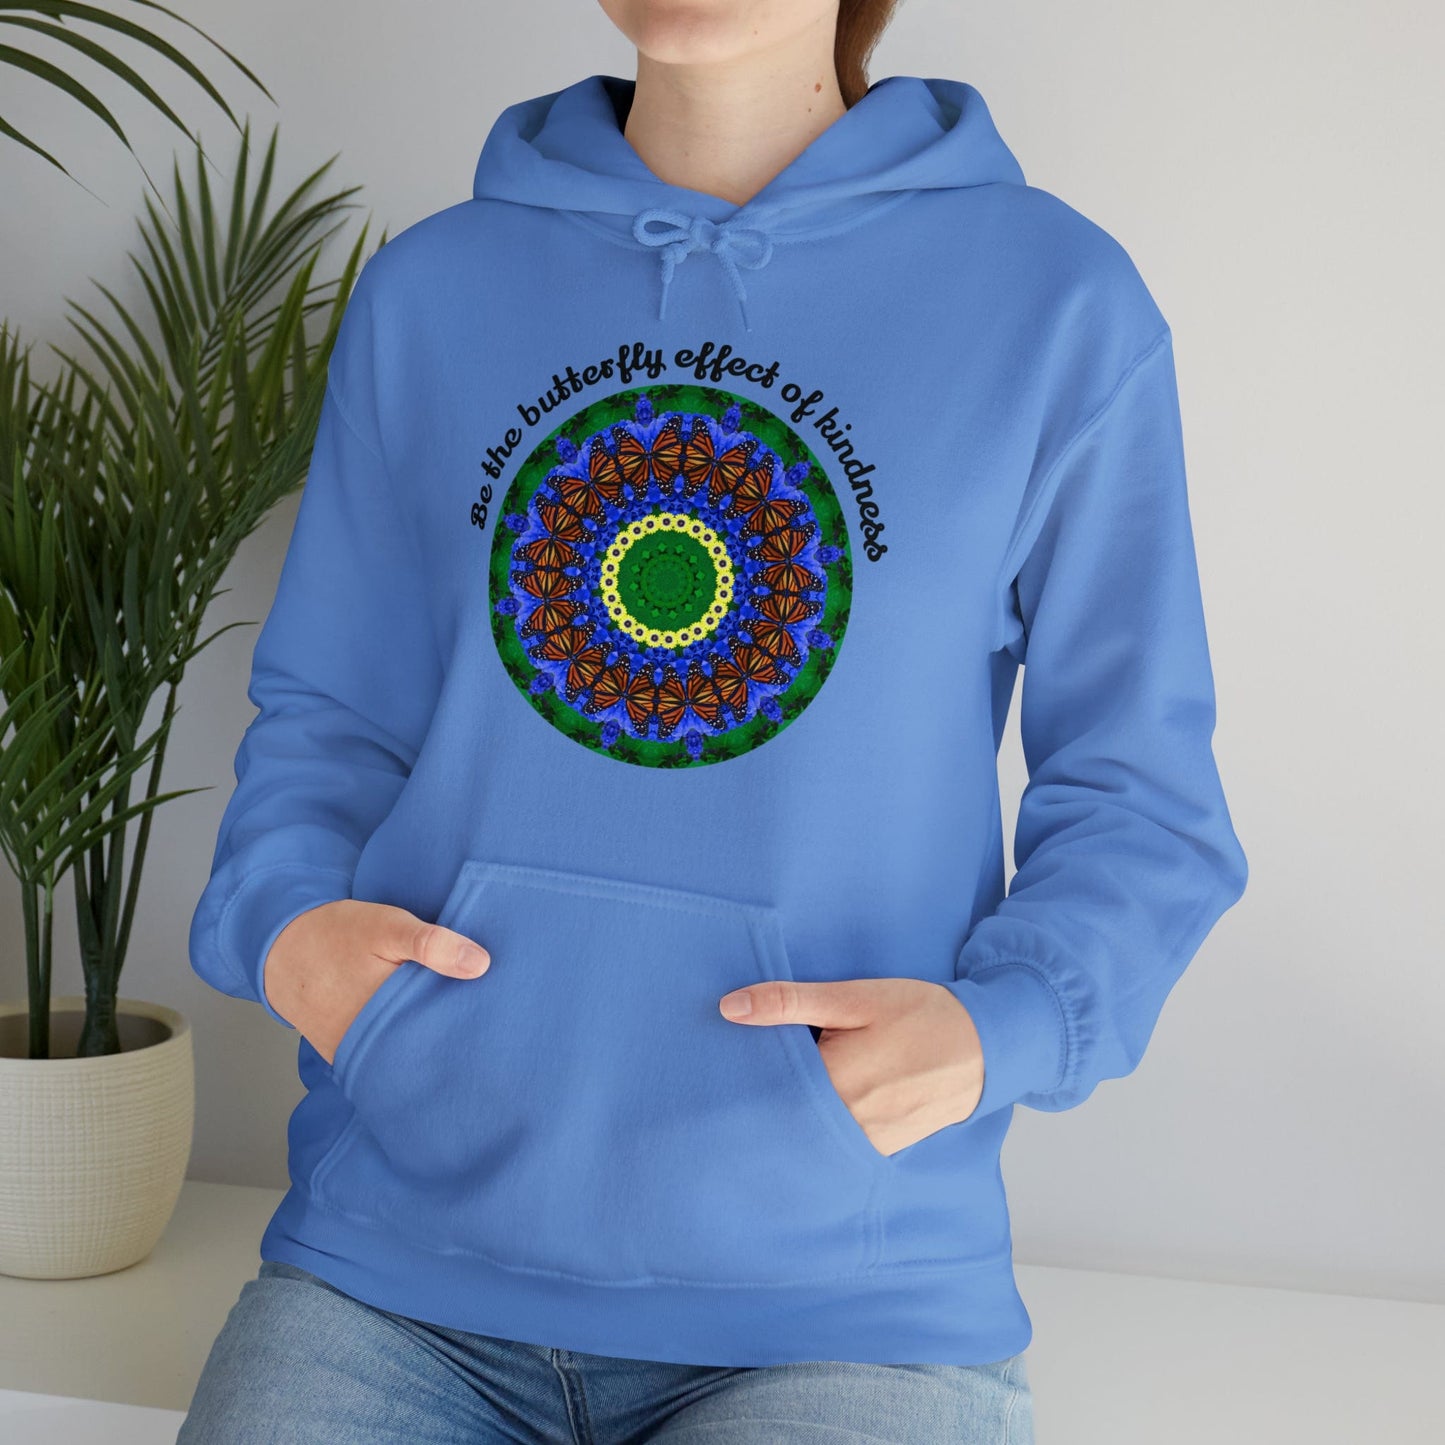 Pretty & Cute Butterfly Kindness Graphic Hoodie Sweatshirt - Monarch Butterfly Mandala Art - Be the butterfly effect of kindness Columbia Blue